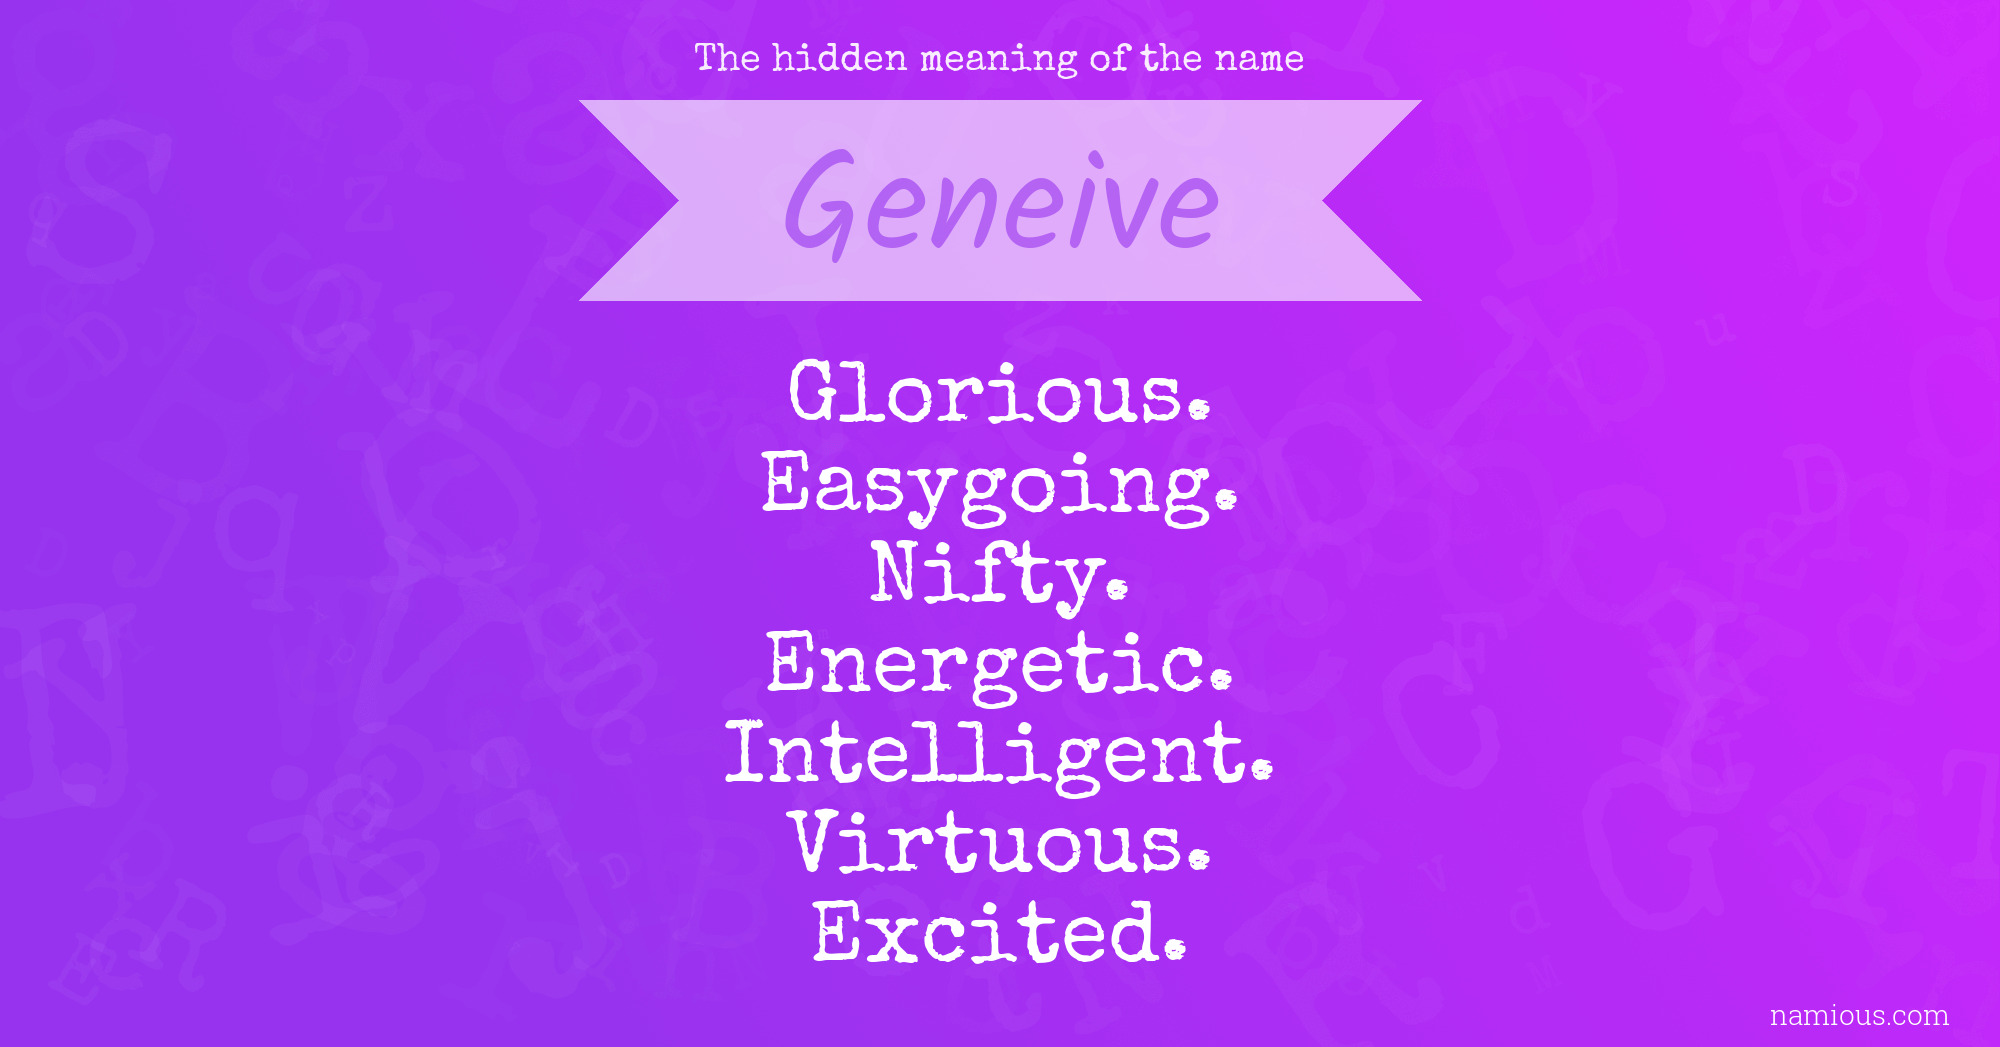 The hidden meaning of the name Geneive